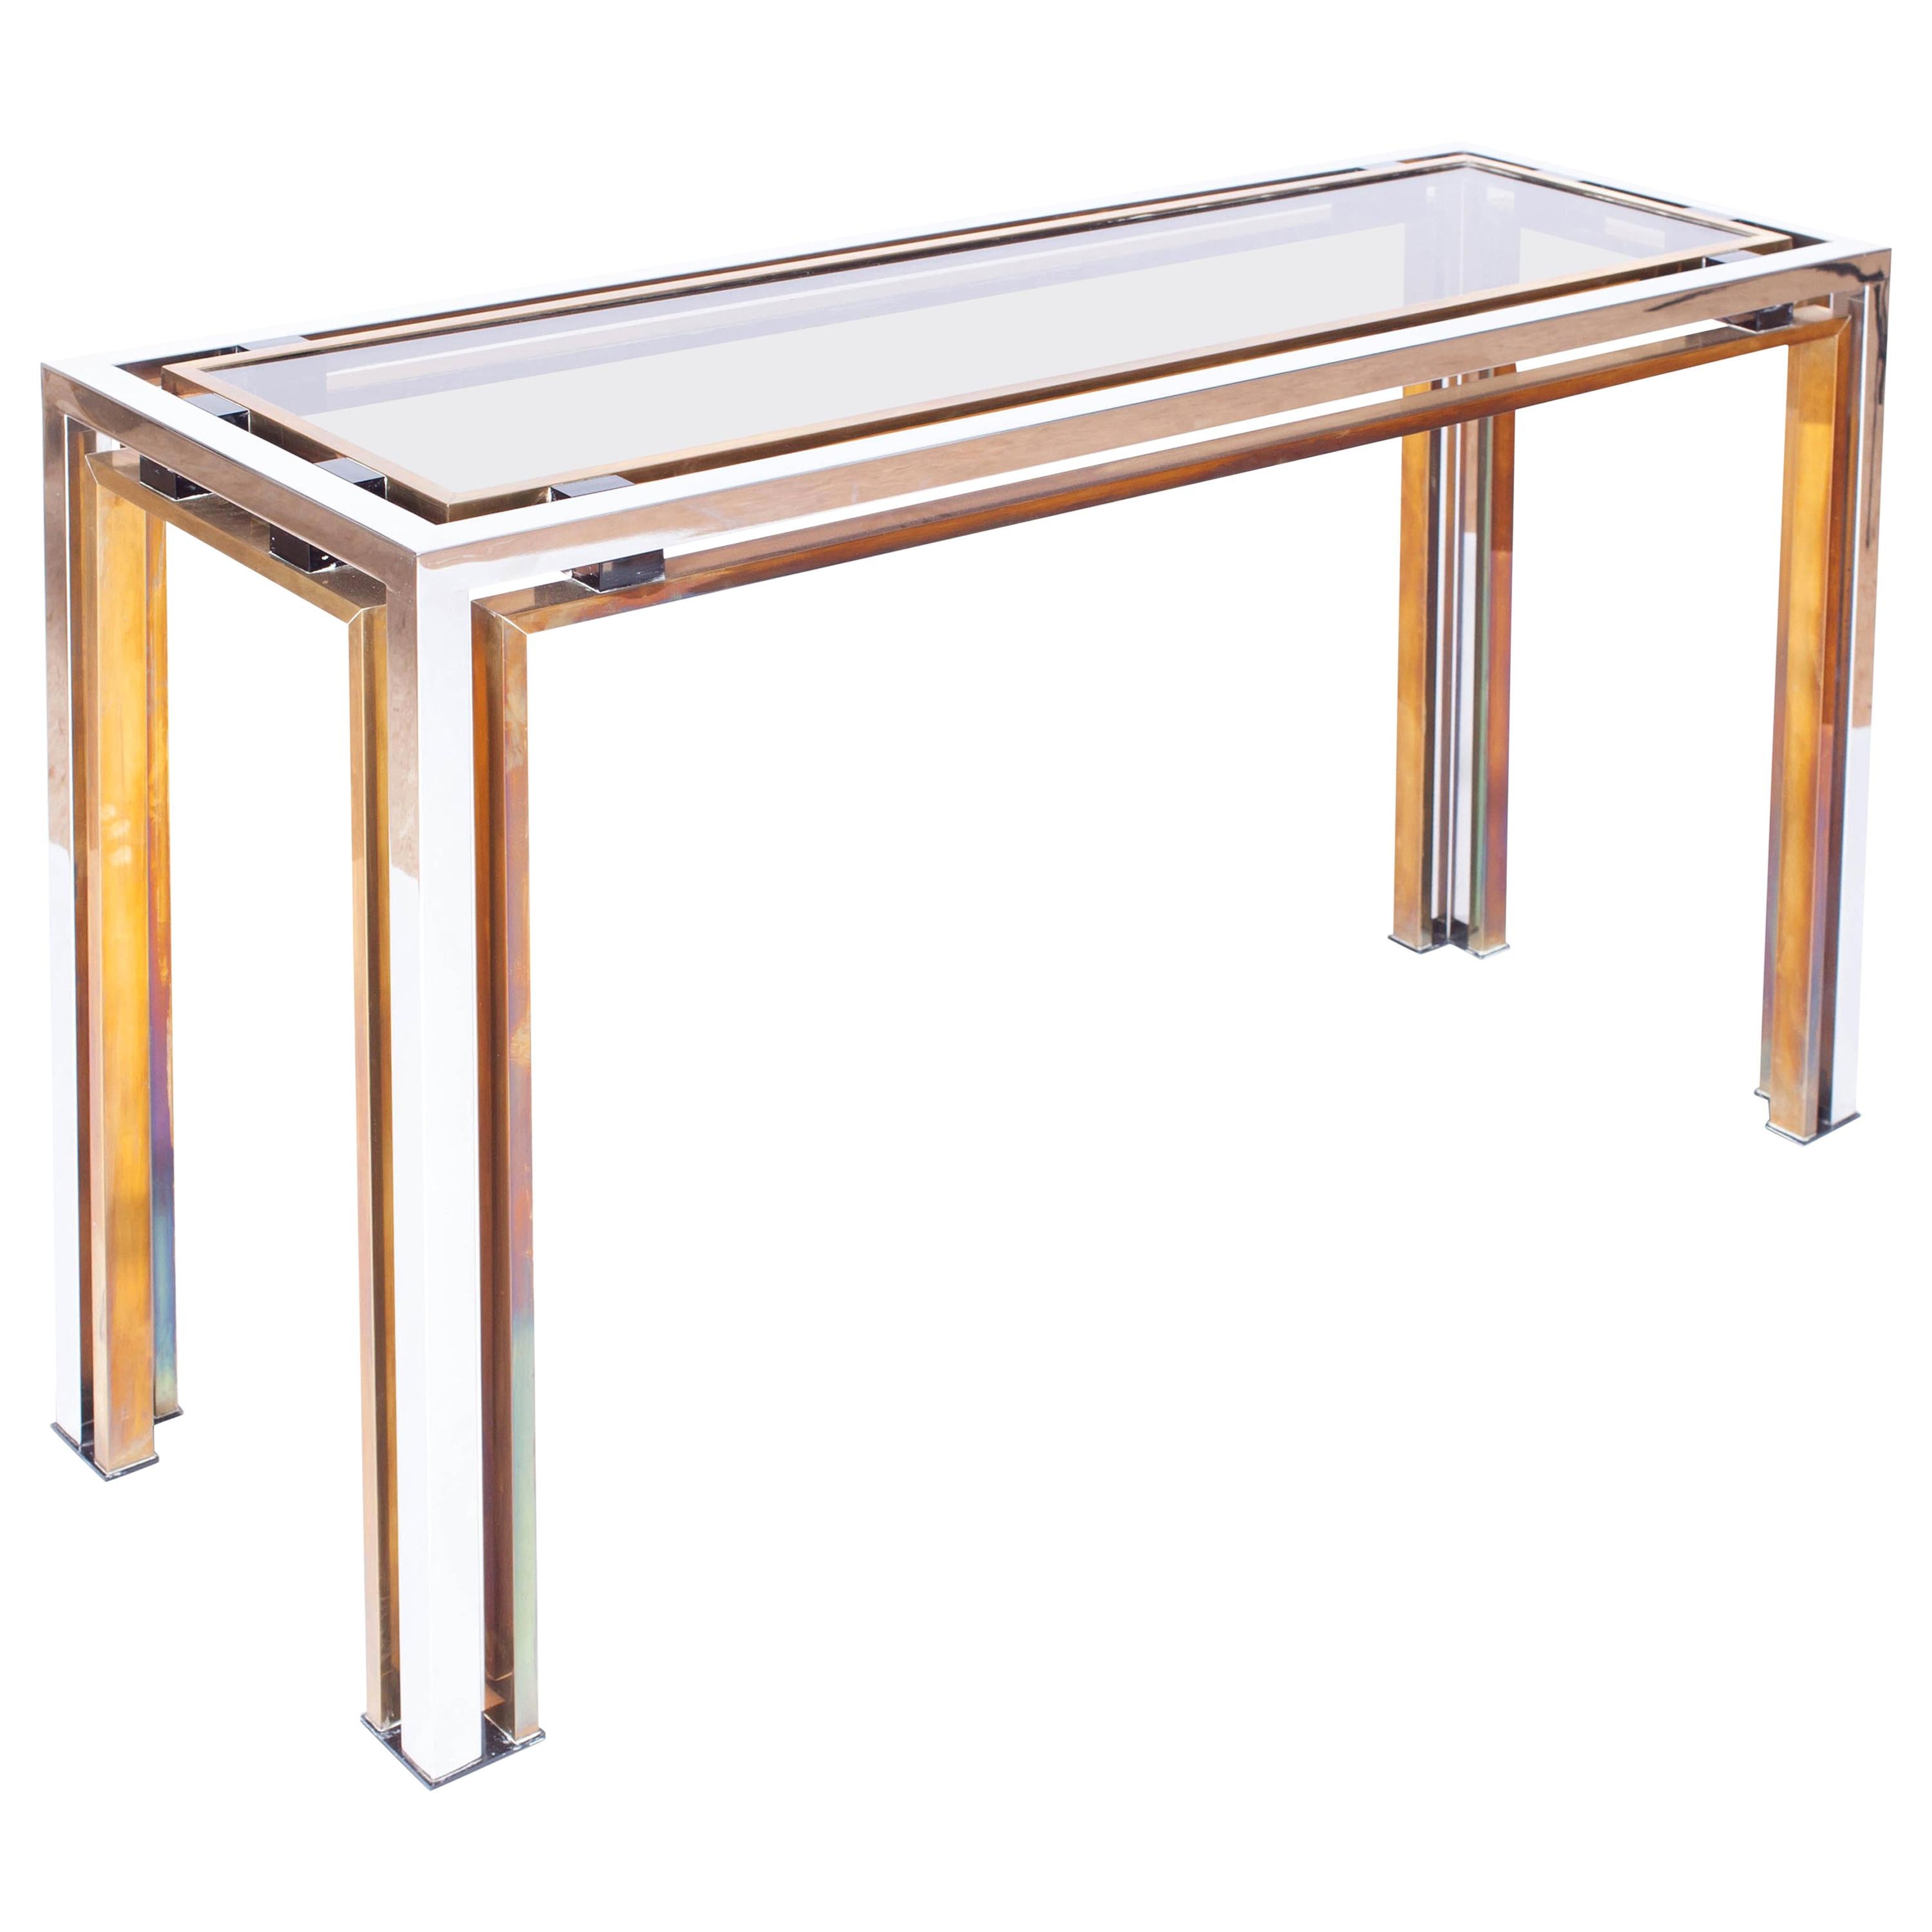 Hollywood Regency, console table, Romeo Rega, Italy, the 1970s.

The sculptural chrome and brass frame is contrasting nicely with the smoked glass top which is held in place with purple perspex details.
Eclectic international style decor.
 